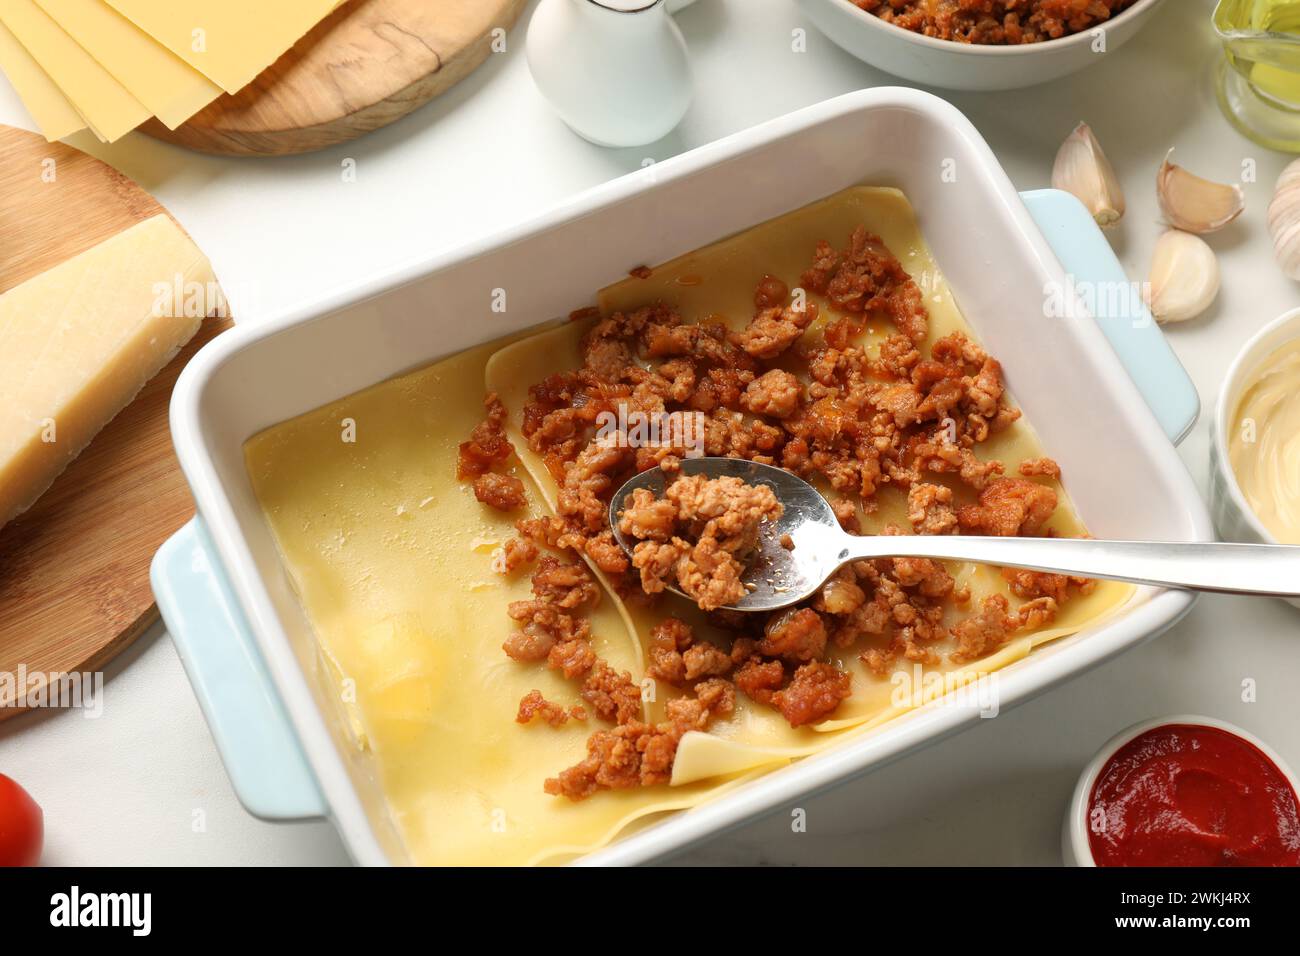 Cooking lasagna. Pasta sheets and minced meat in baking tray on white table, above view Stock Photo